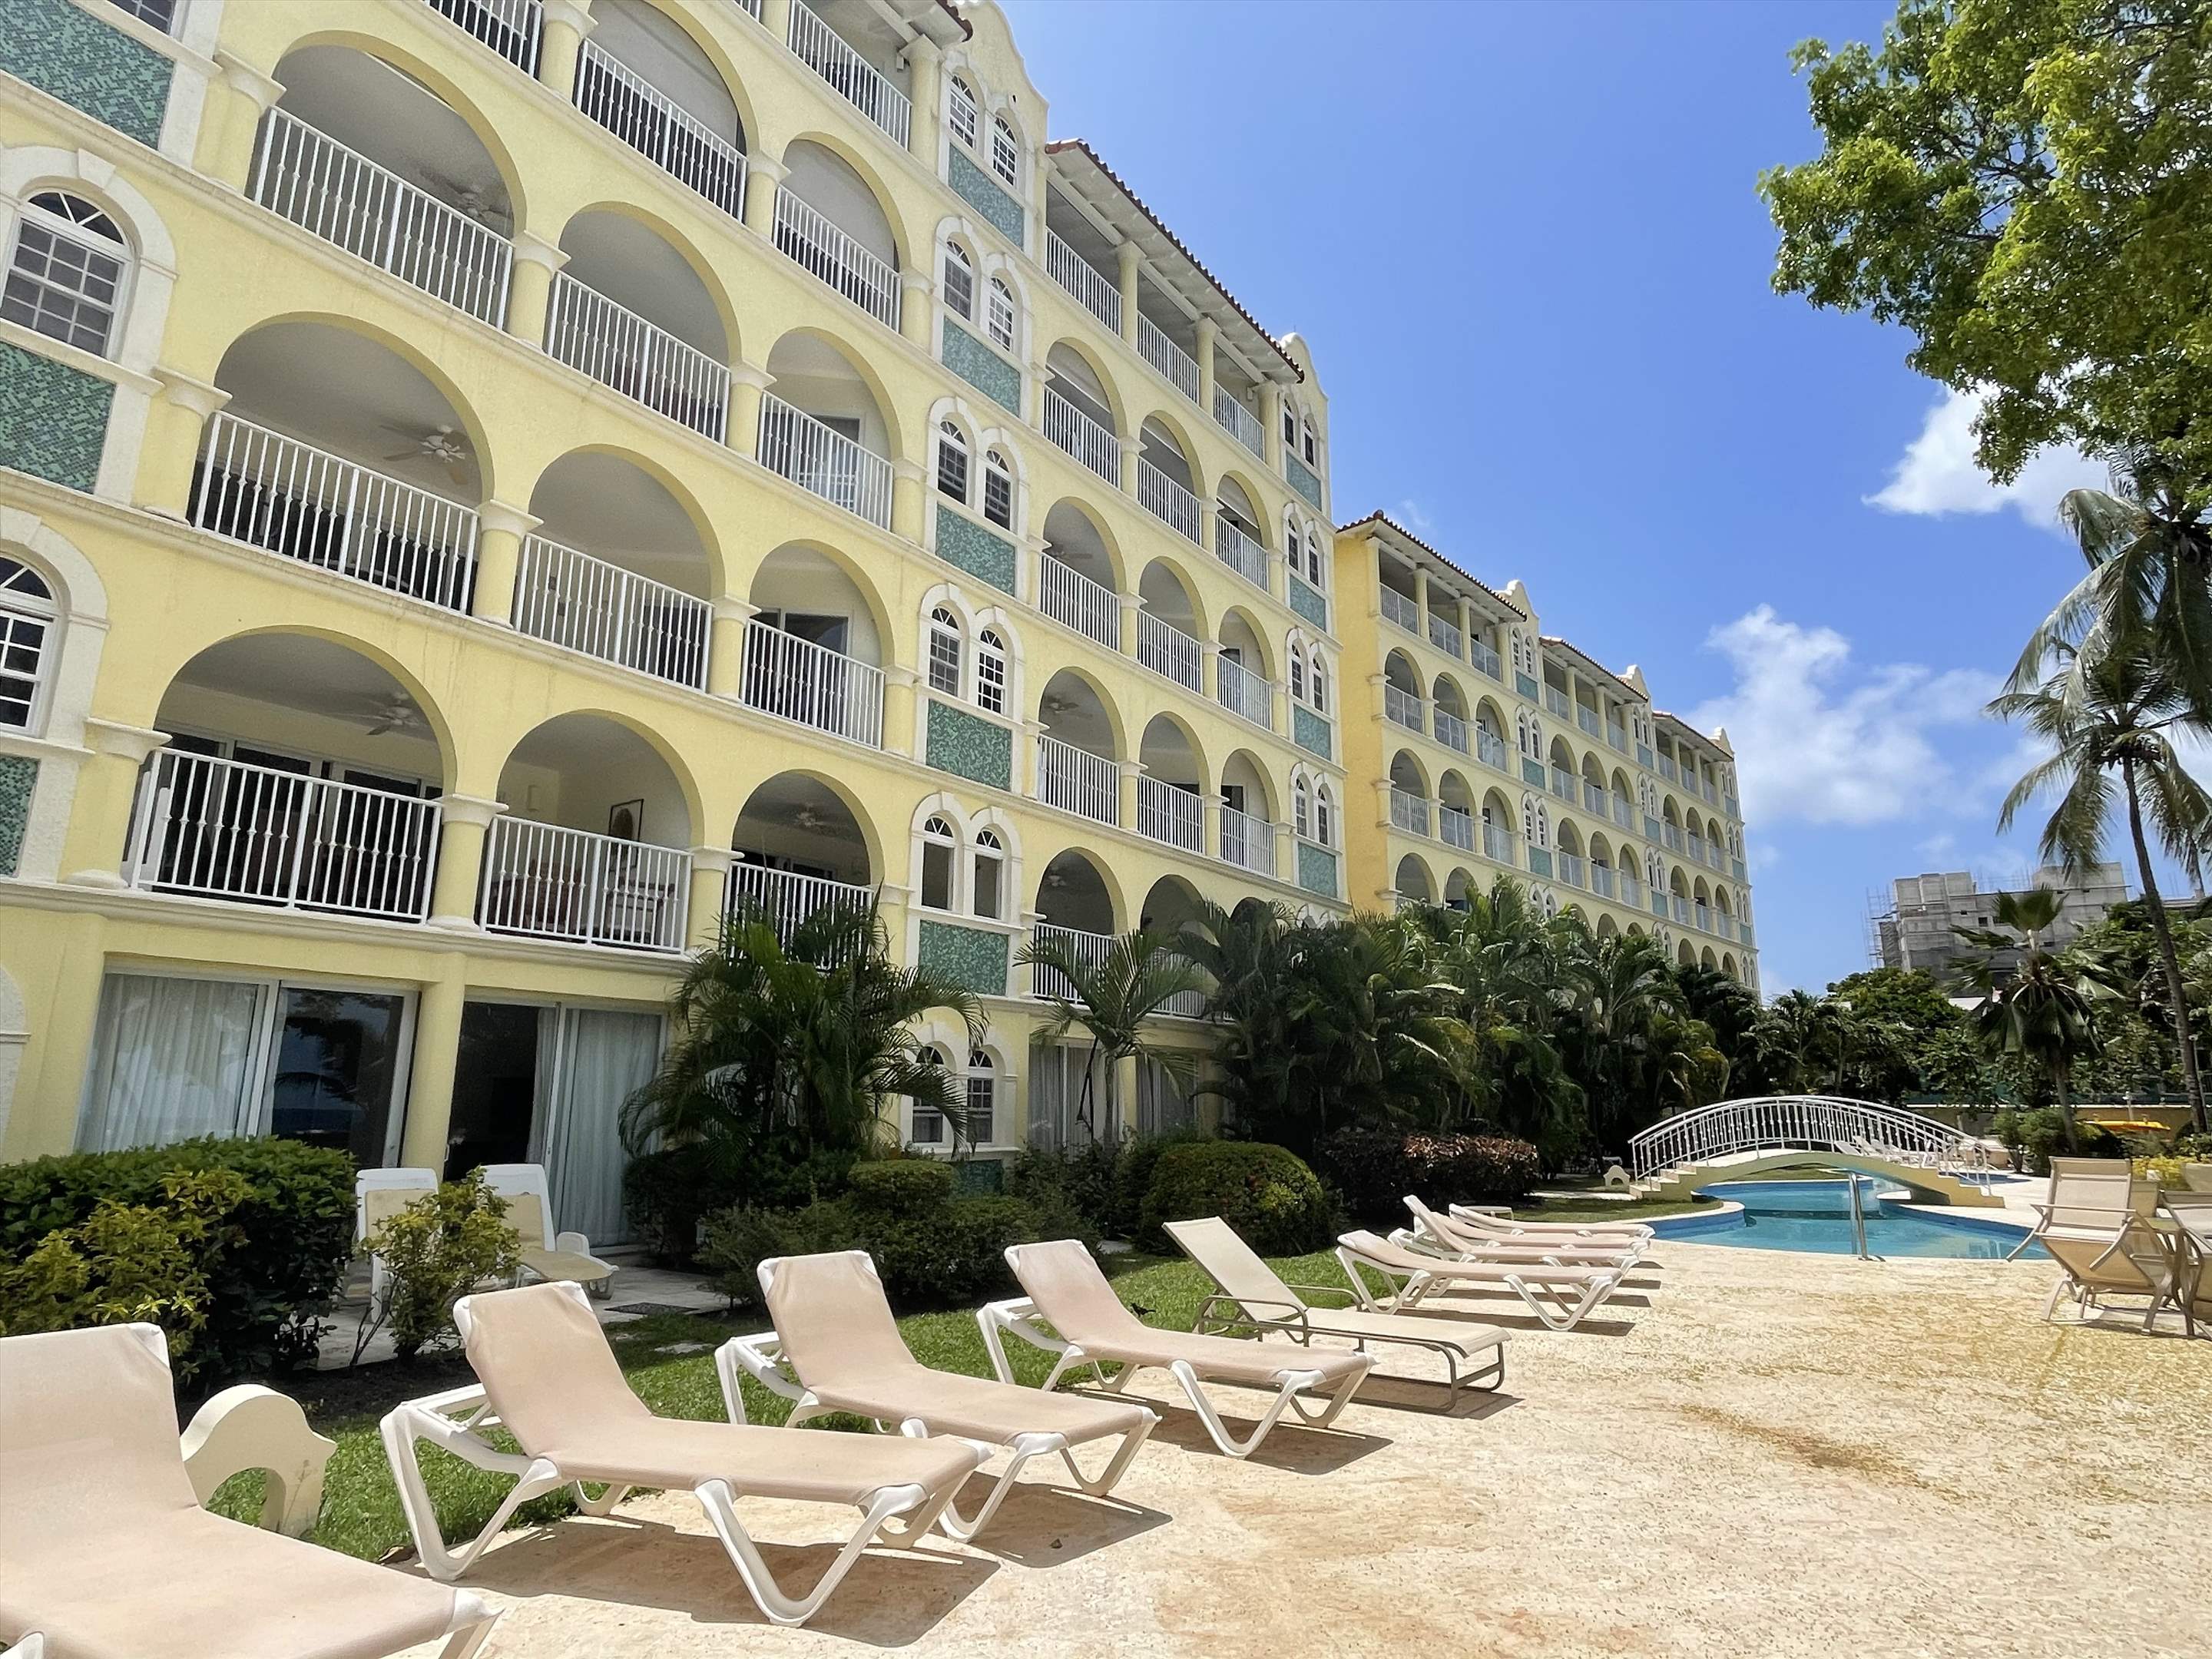 Sapphire Beach 505 , 2 Bedroom , 2 bedroom apartment in St. Lawrence Gap & South Coast, Barbados Photo #4